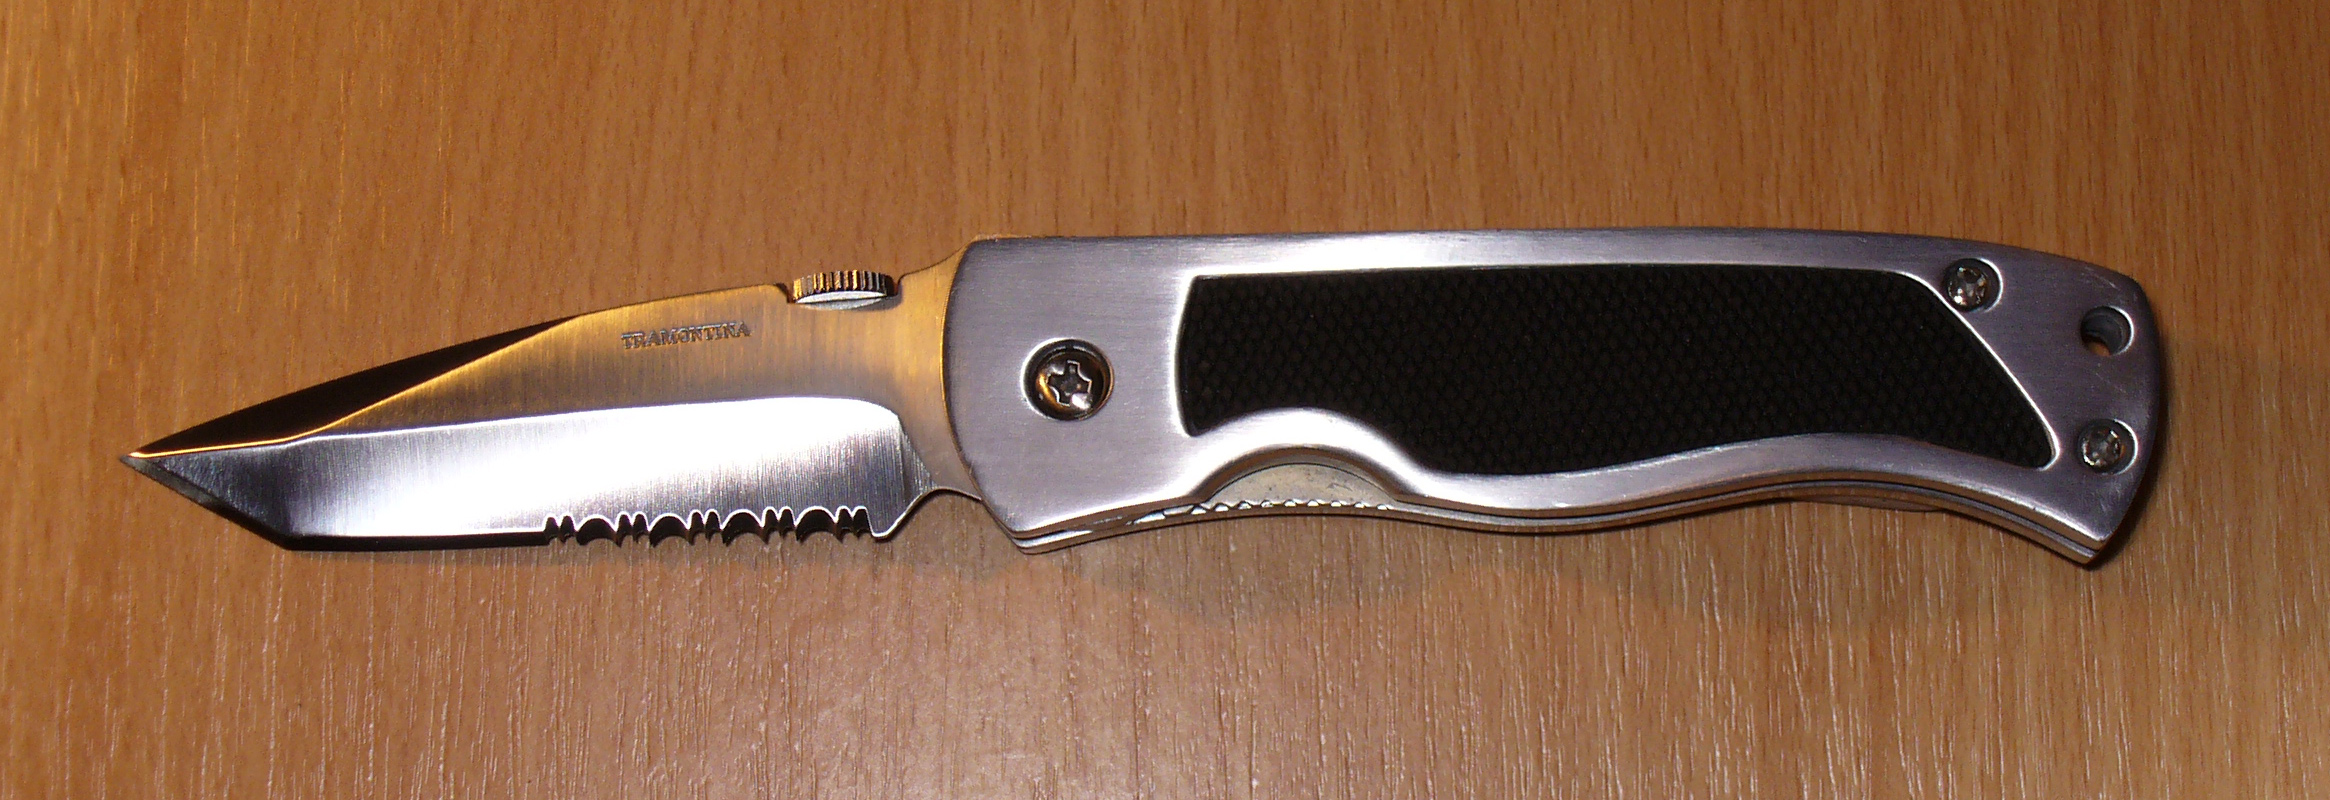 Carrying the average pocket knife that you can buy from most stores can get you thrown in prison in New York City.